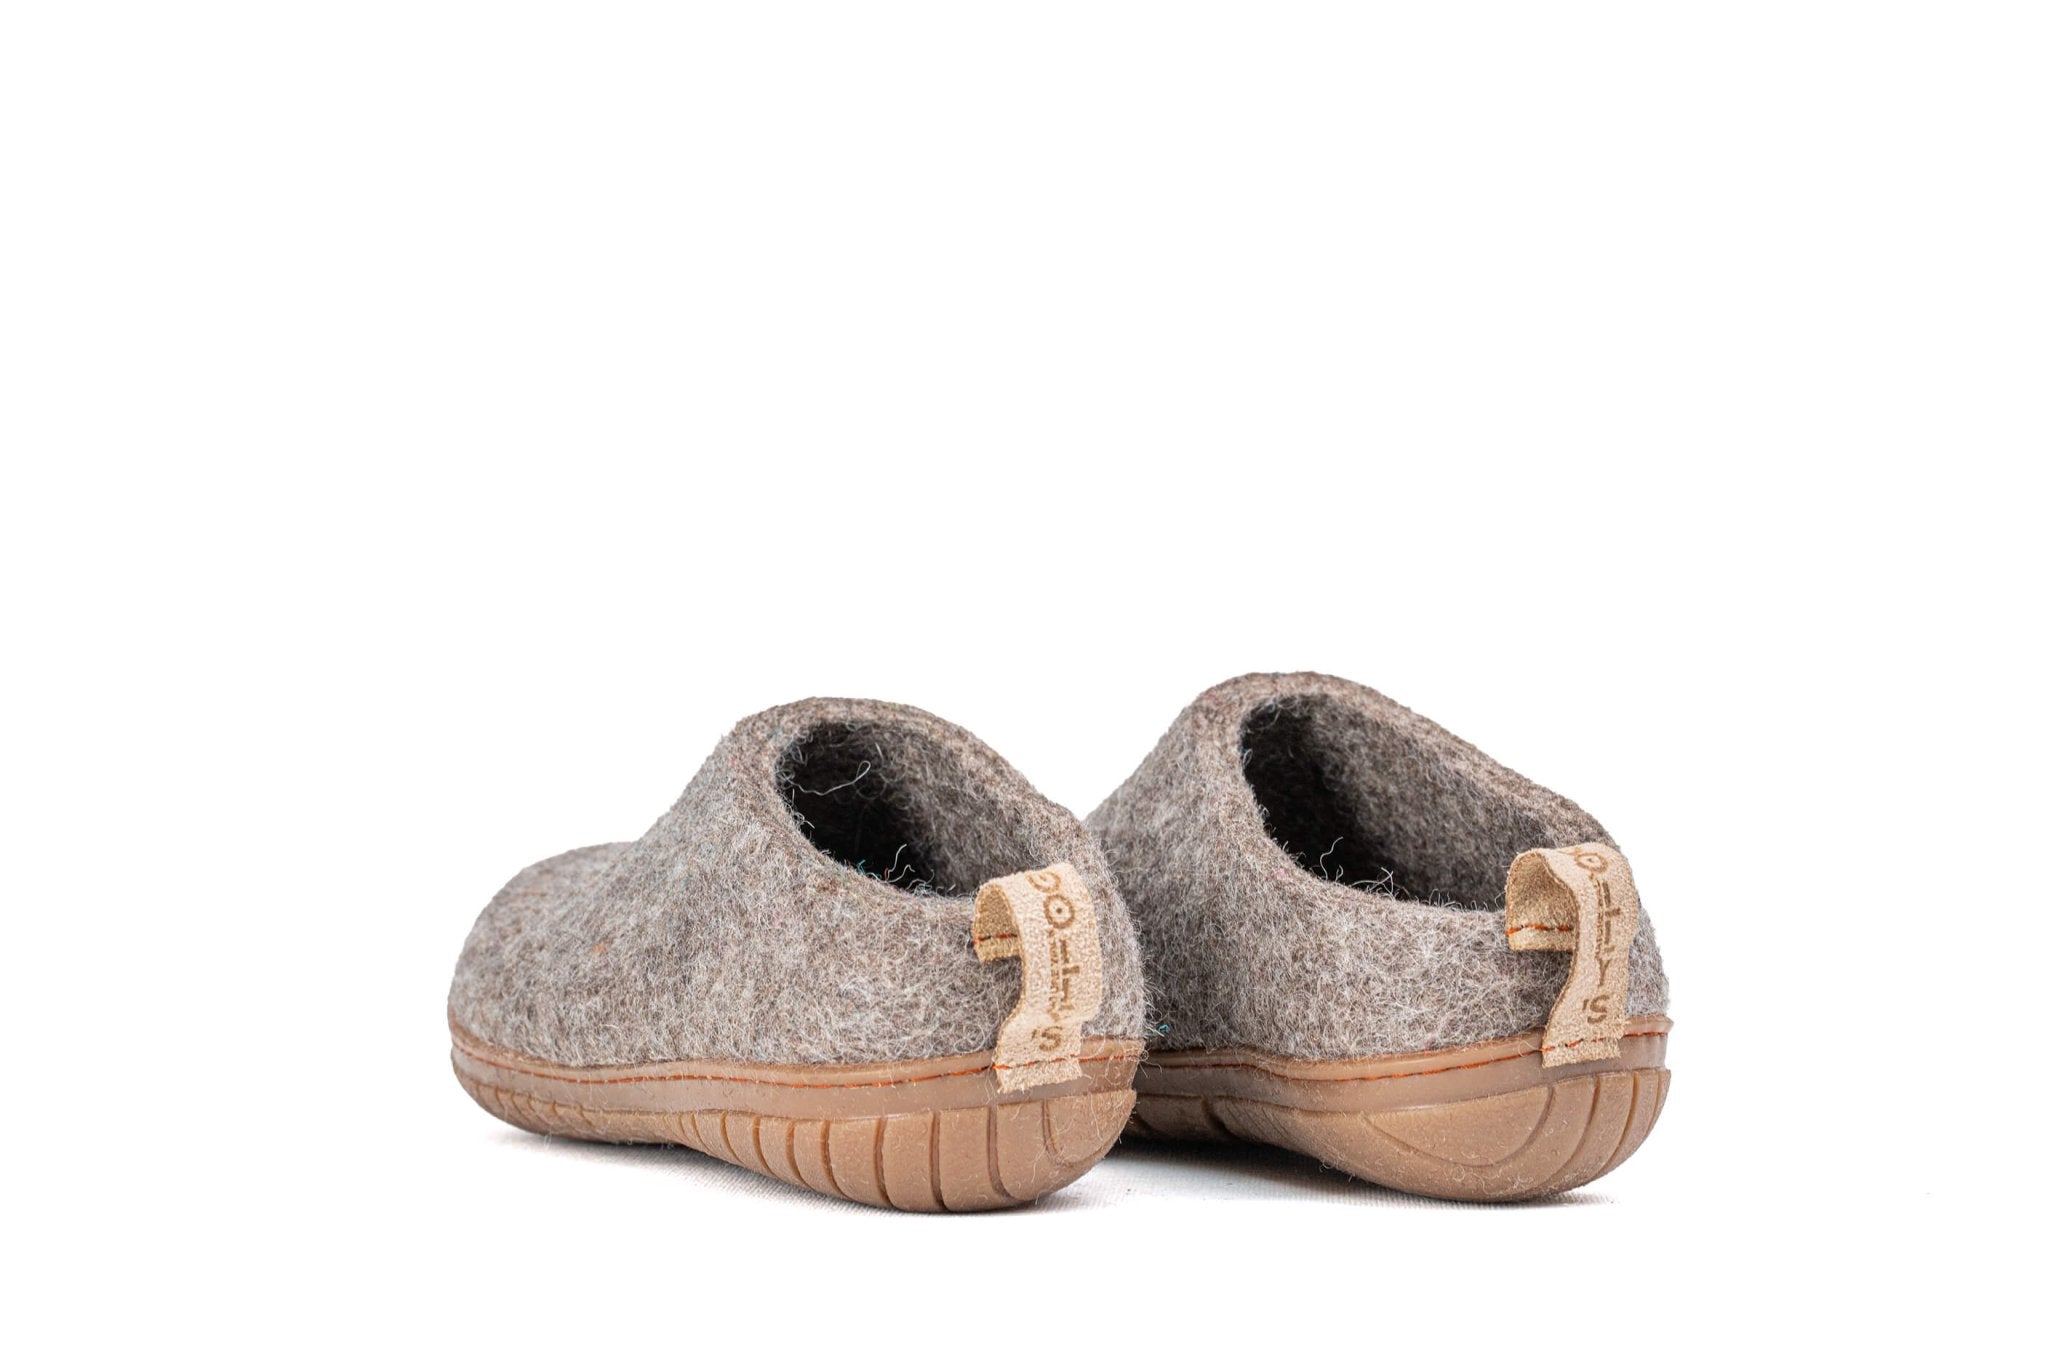 Outdoor Open Heel Slippers With Leather Sole - Natural Brown - Woollyes